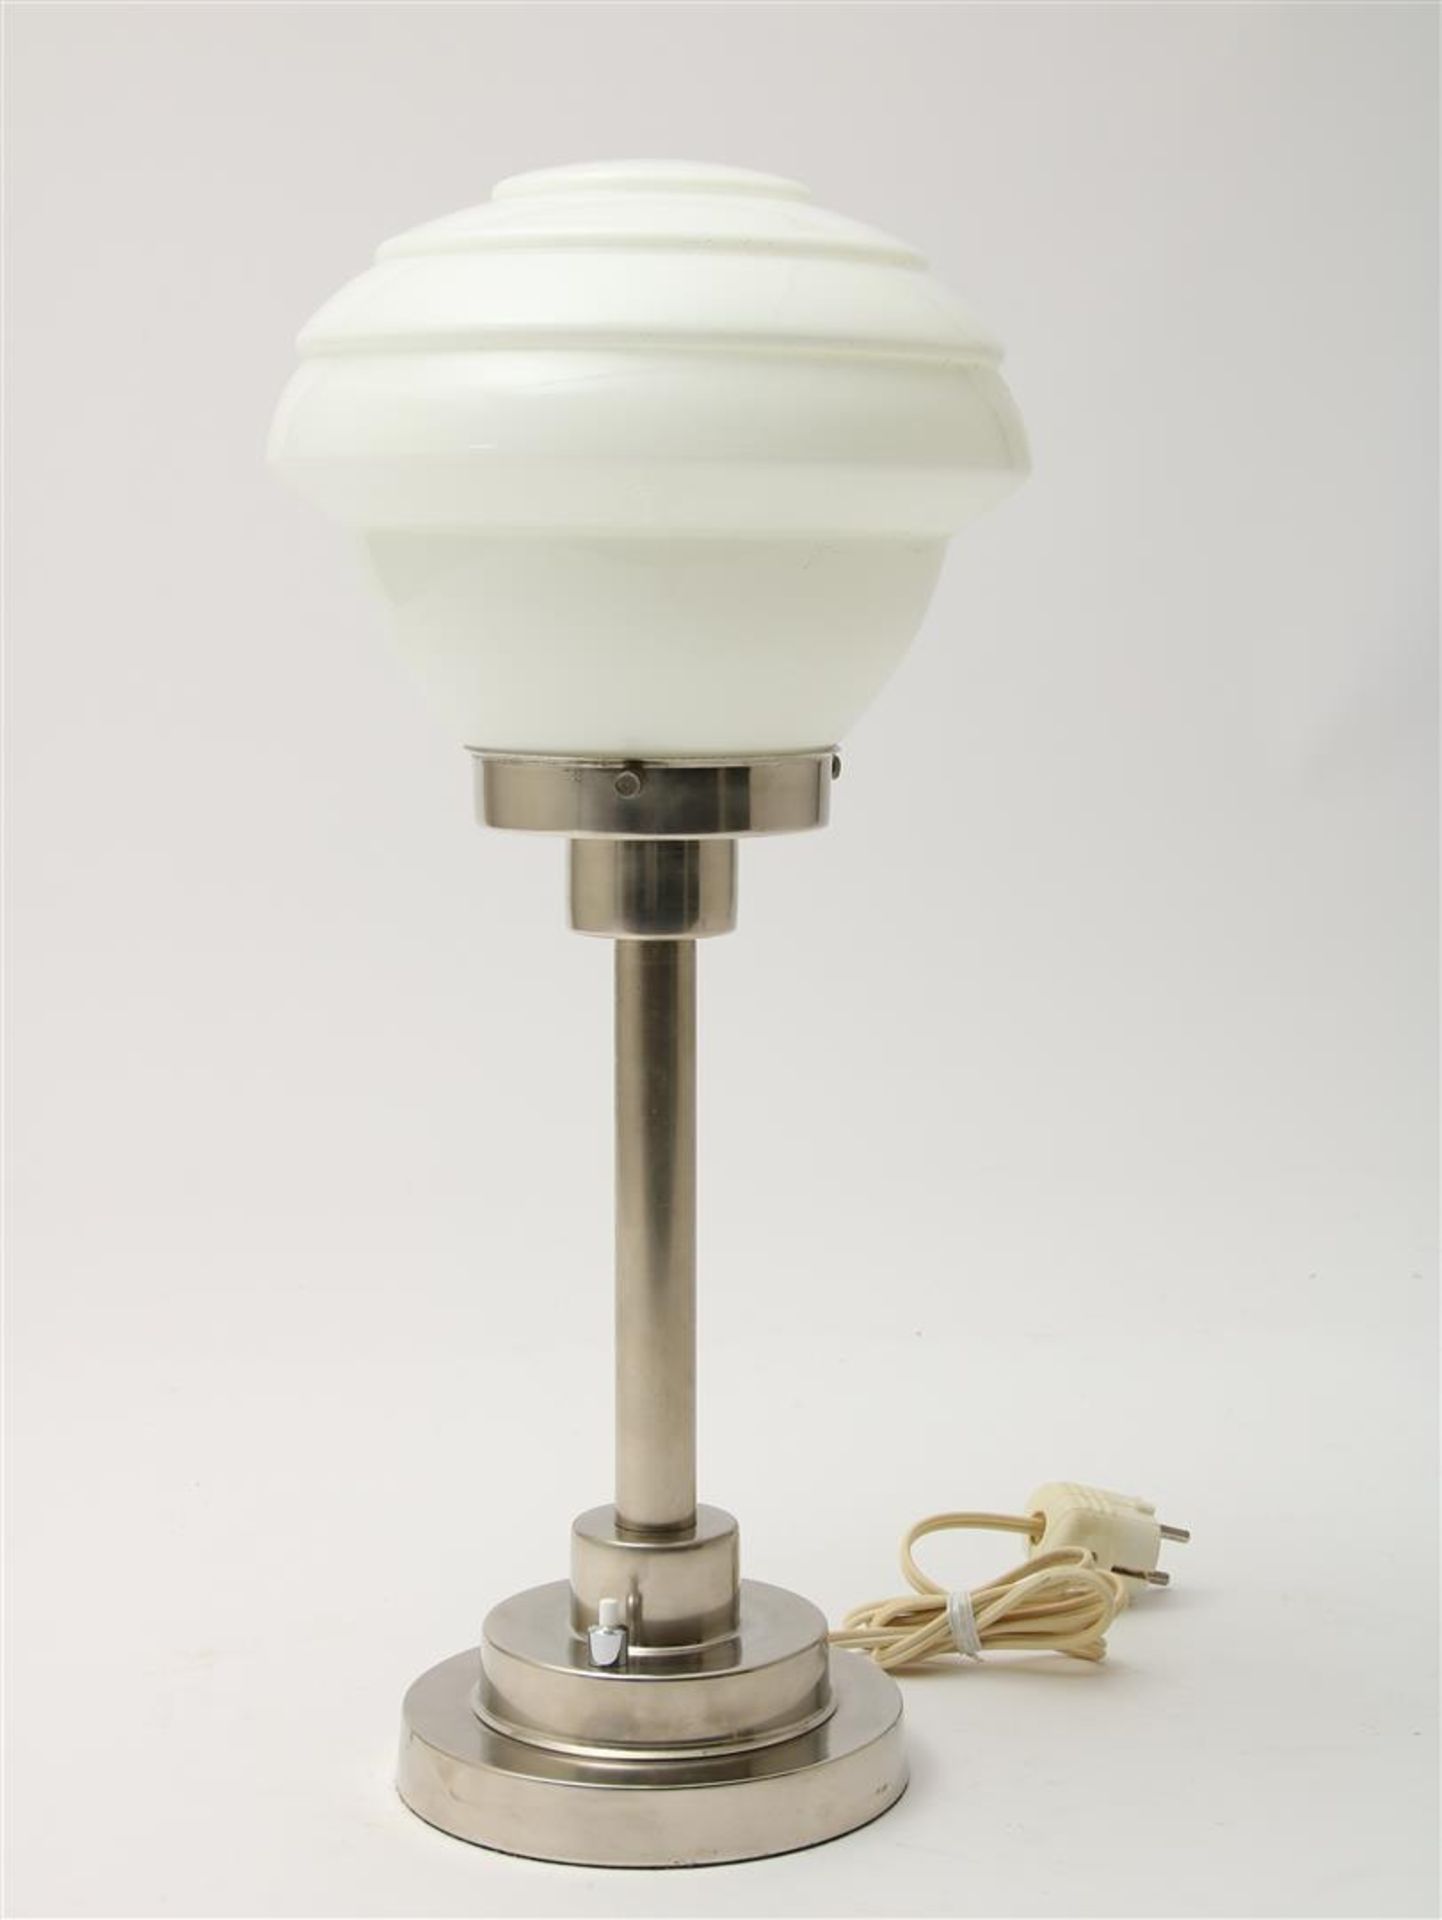 Chrome-plated Art Deco Gispen-style table lamp with opaline shade, h. 47 cm.